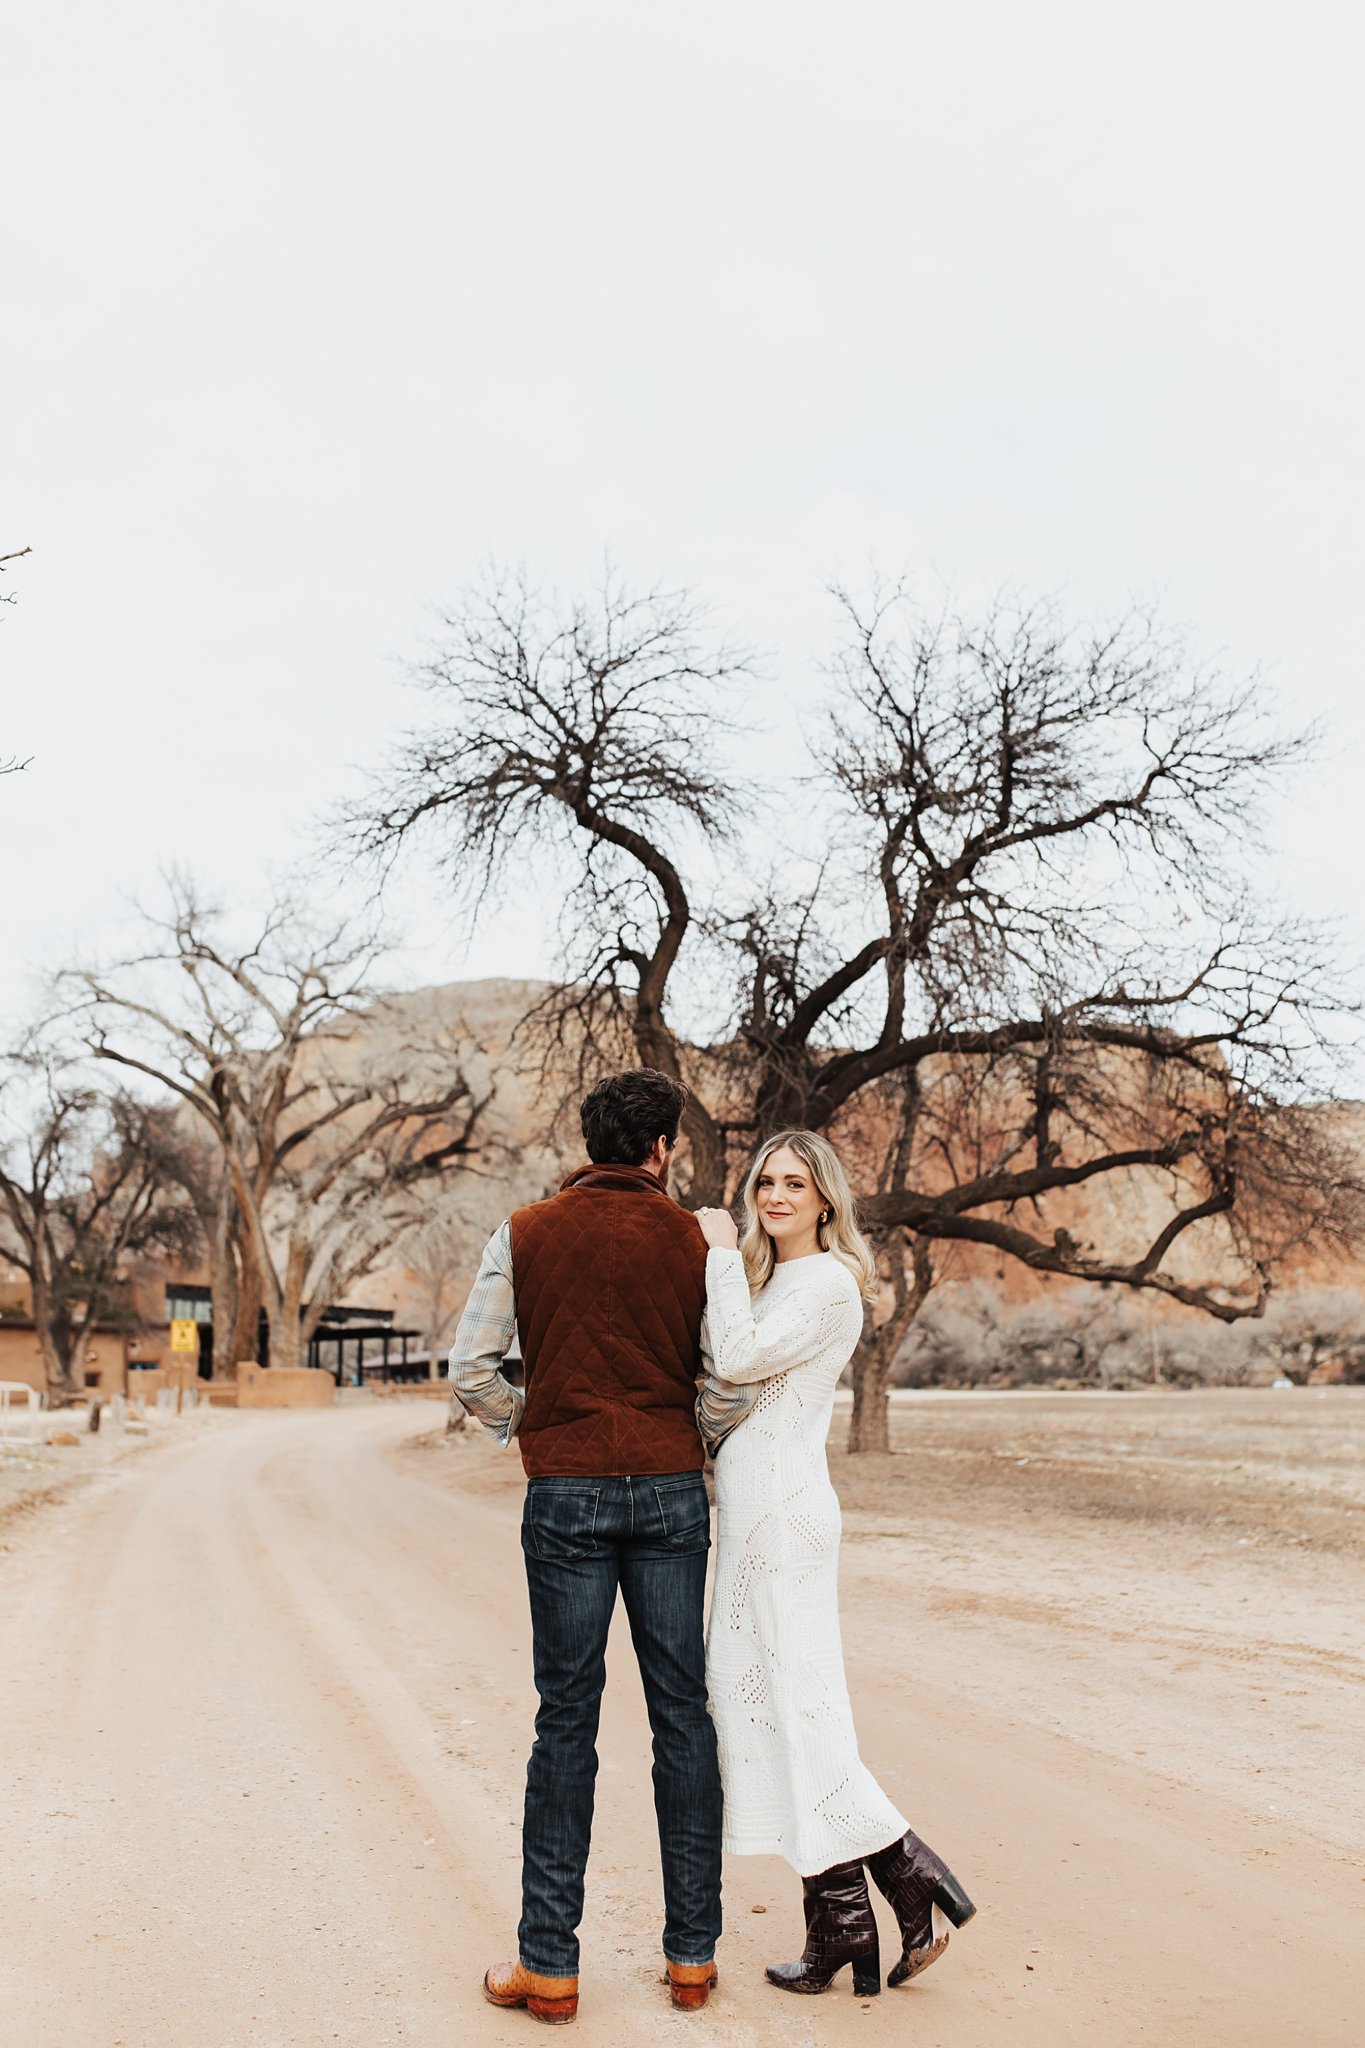 Alicia+lucia+photography+-+albuquerque+wedding+photographer+-+santa+fe+wedding+photography+-+new+mexico+wedding+photographer+-+new+mexico+wedding+-+southwest+engagement+-+ghost+ranch+engagement+-+ghost+ranch+wedding_0027.jpg